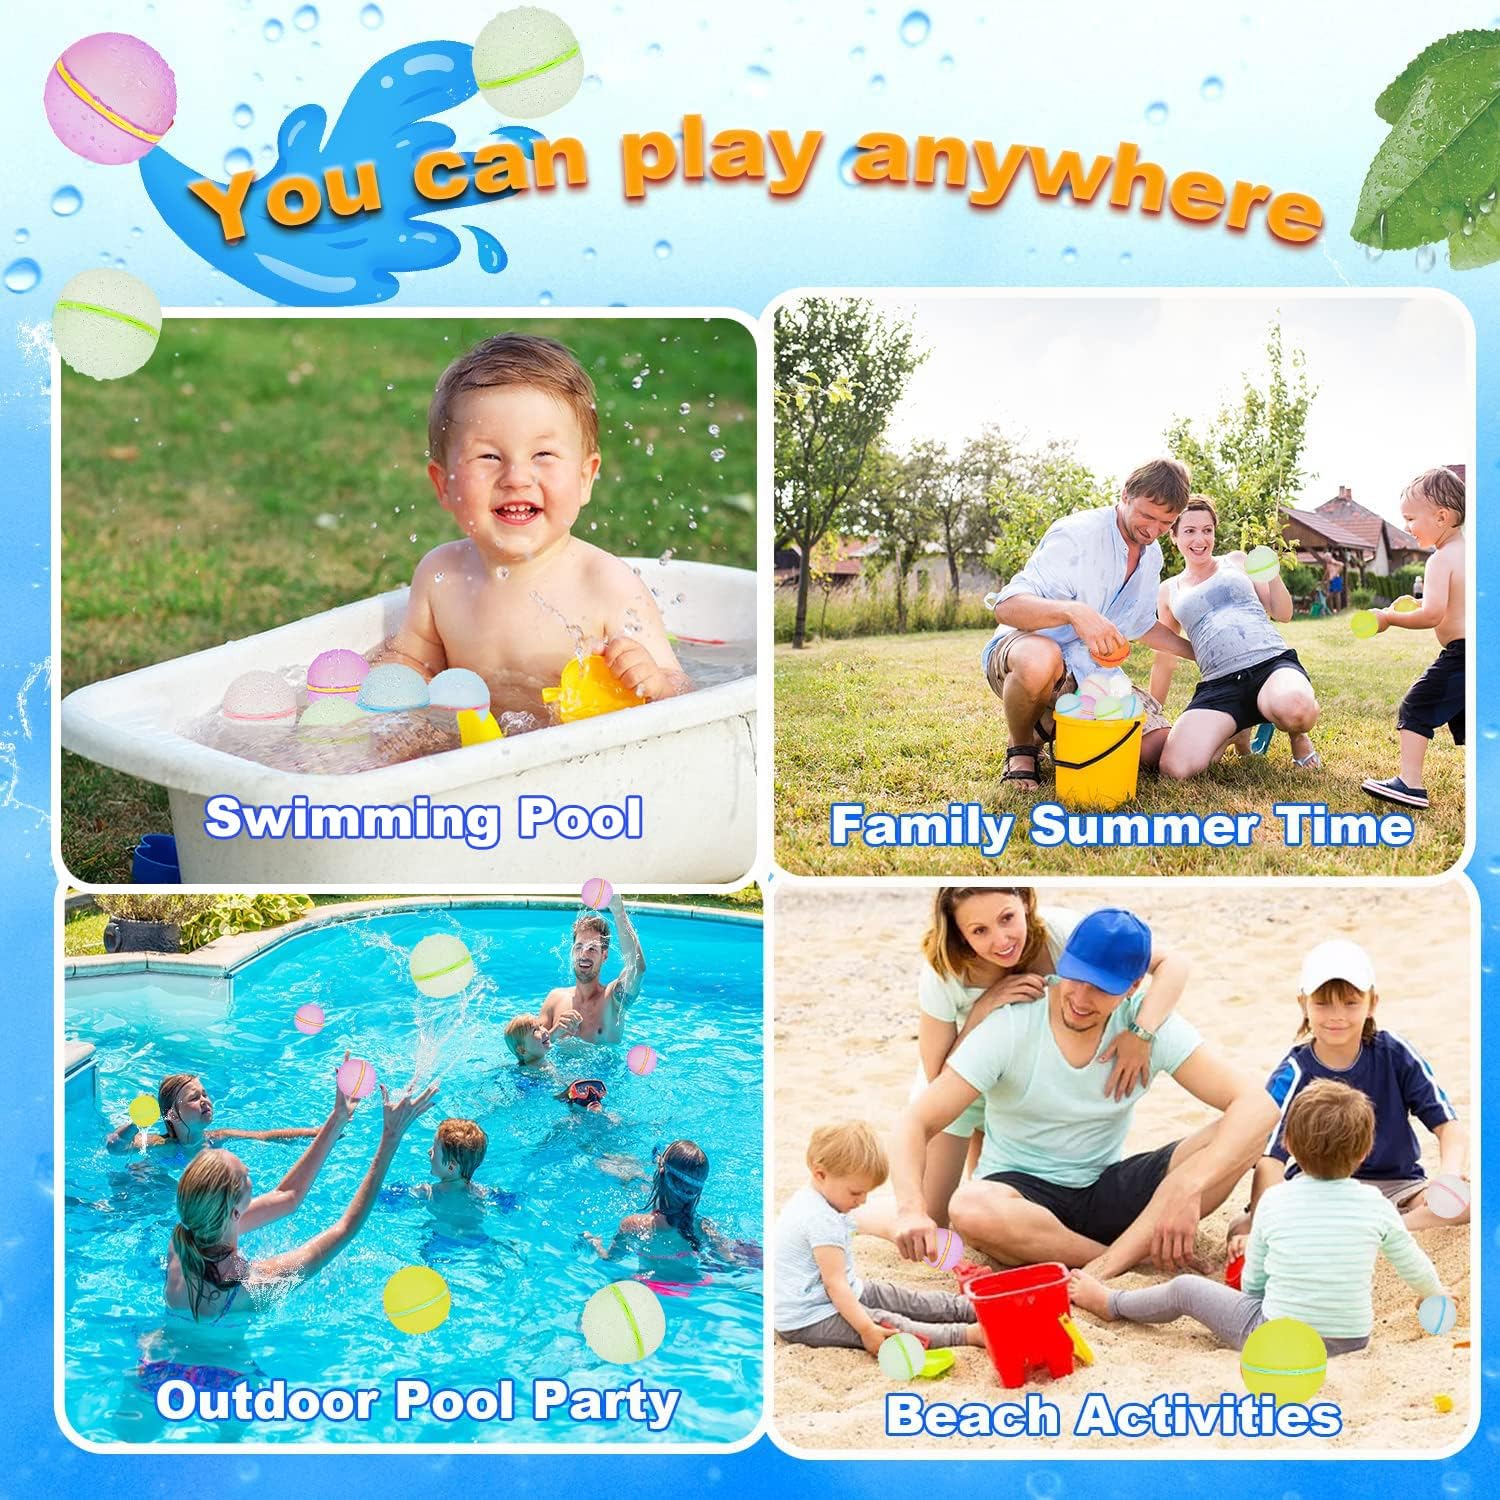 98K Reusable Water Balloons Self Sealing Easy Quick Fill, Silicone Water Balls Summer Fun Outdoor Water Toys Games for Kids Adults Outside Play, Bath Backyard Swimming Pool Party Supplies (6 PCS)